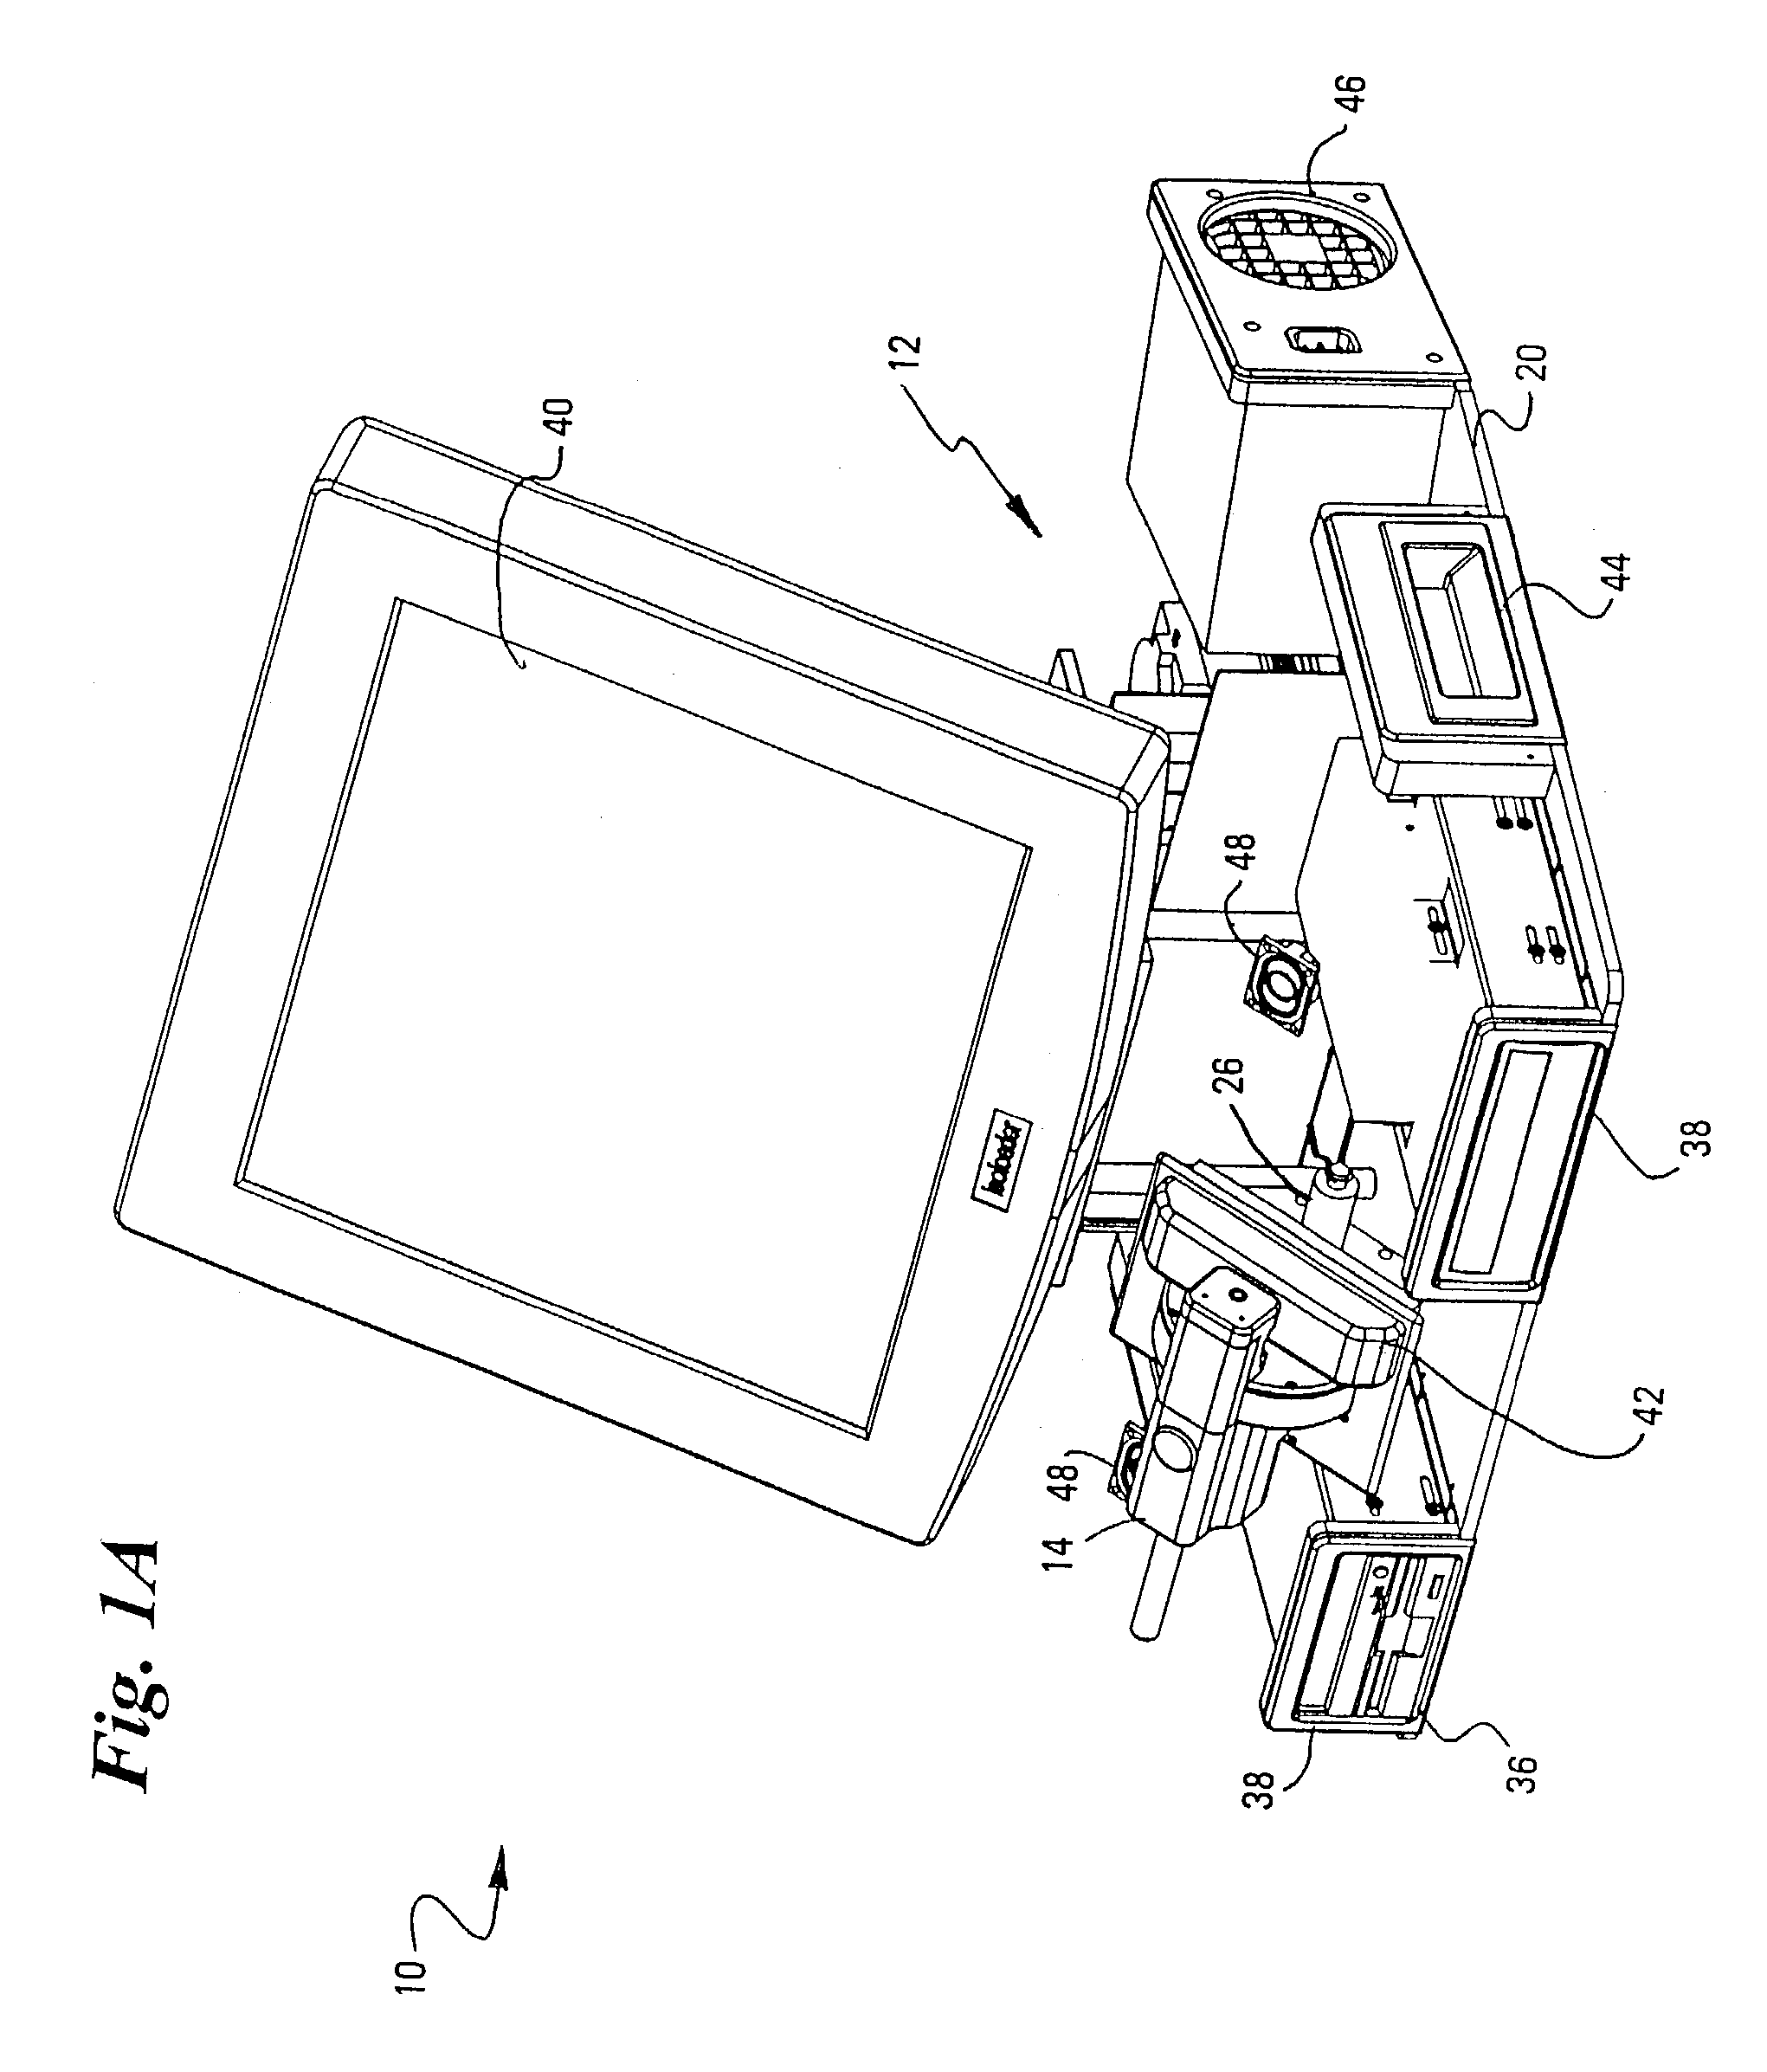 Automated radioisotope seed loader system for implant needles